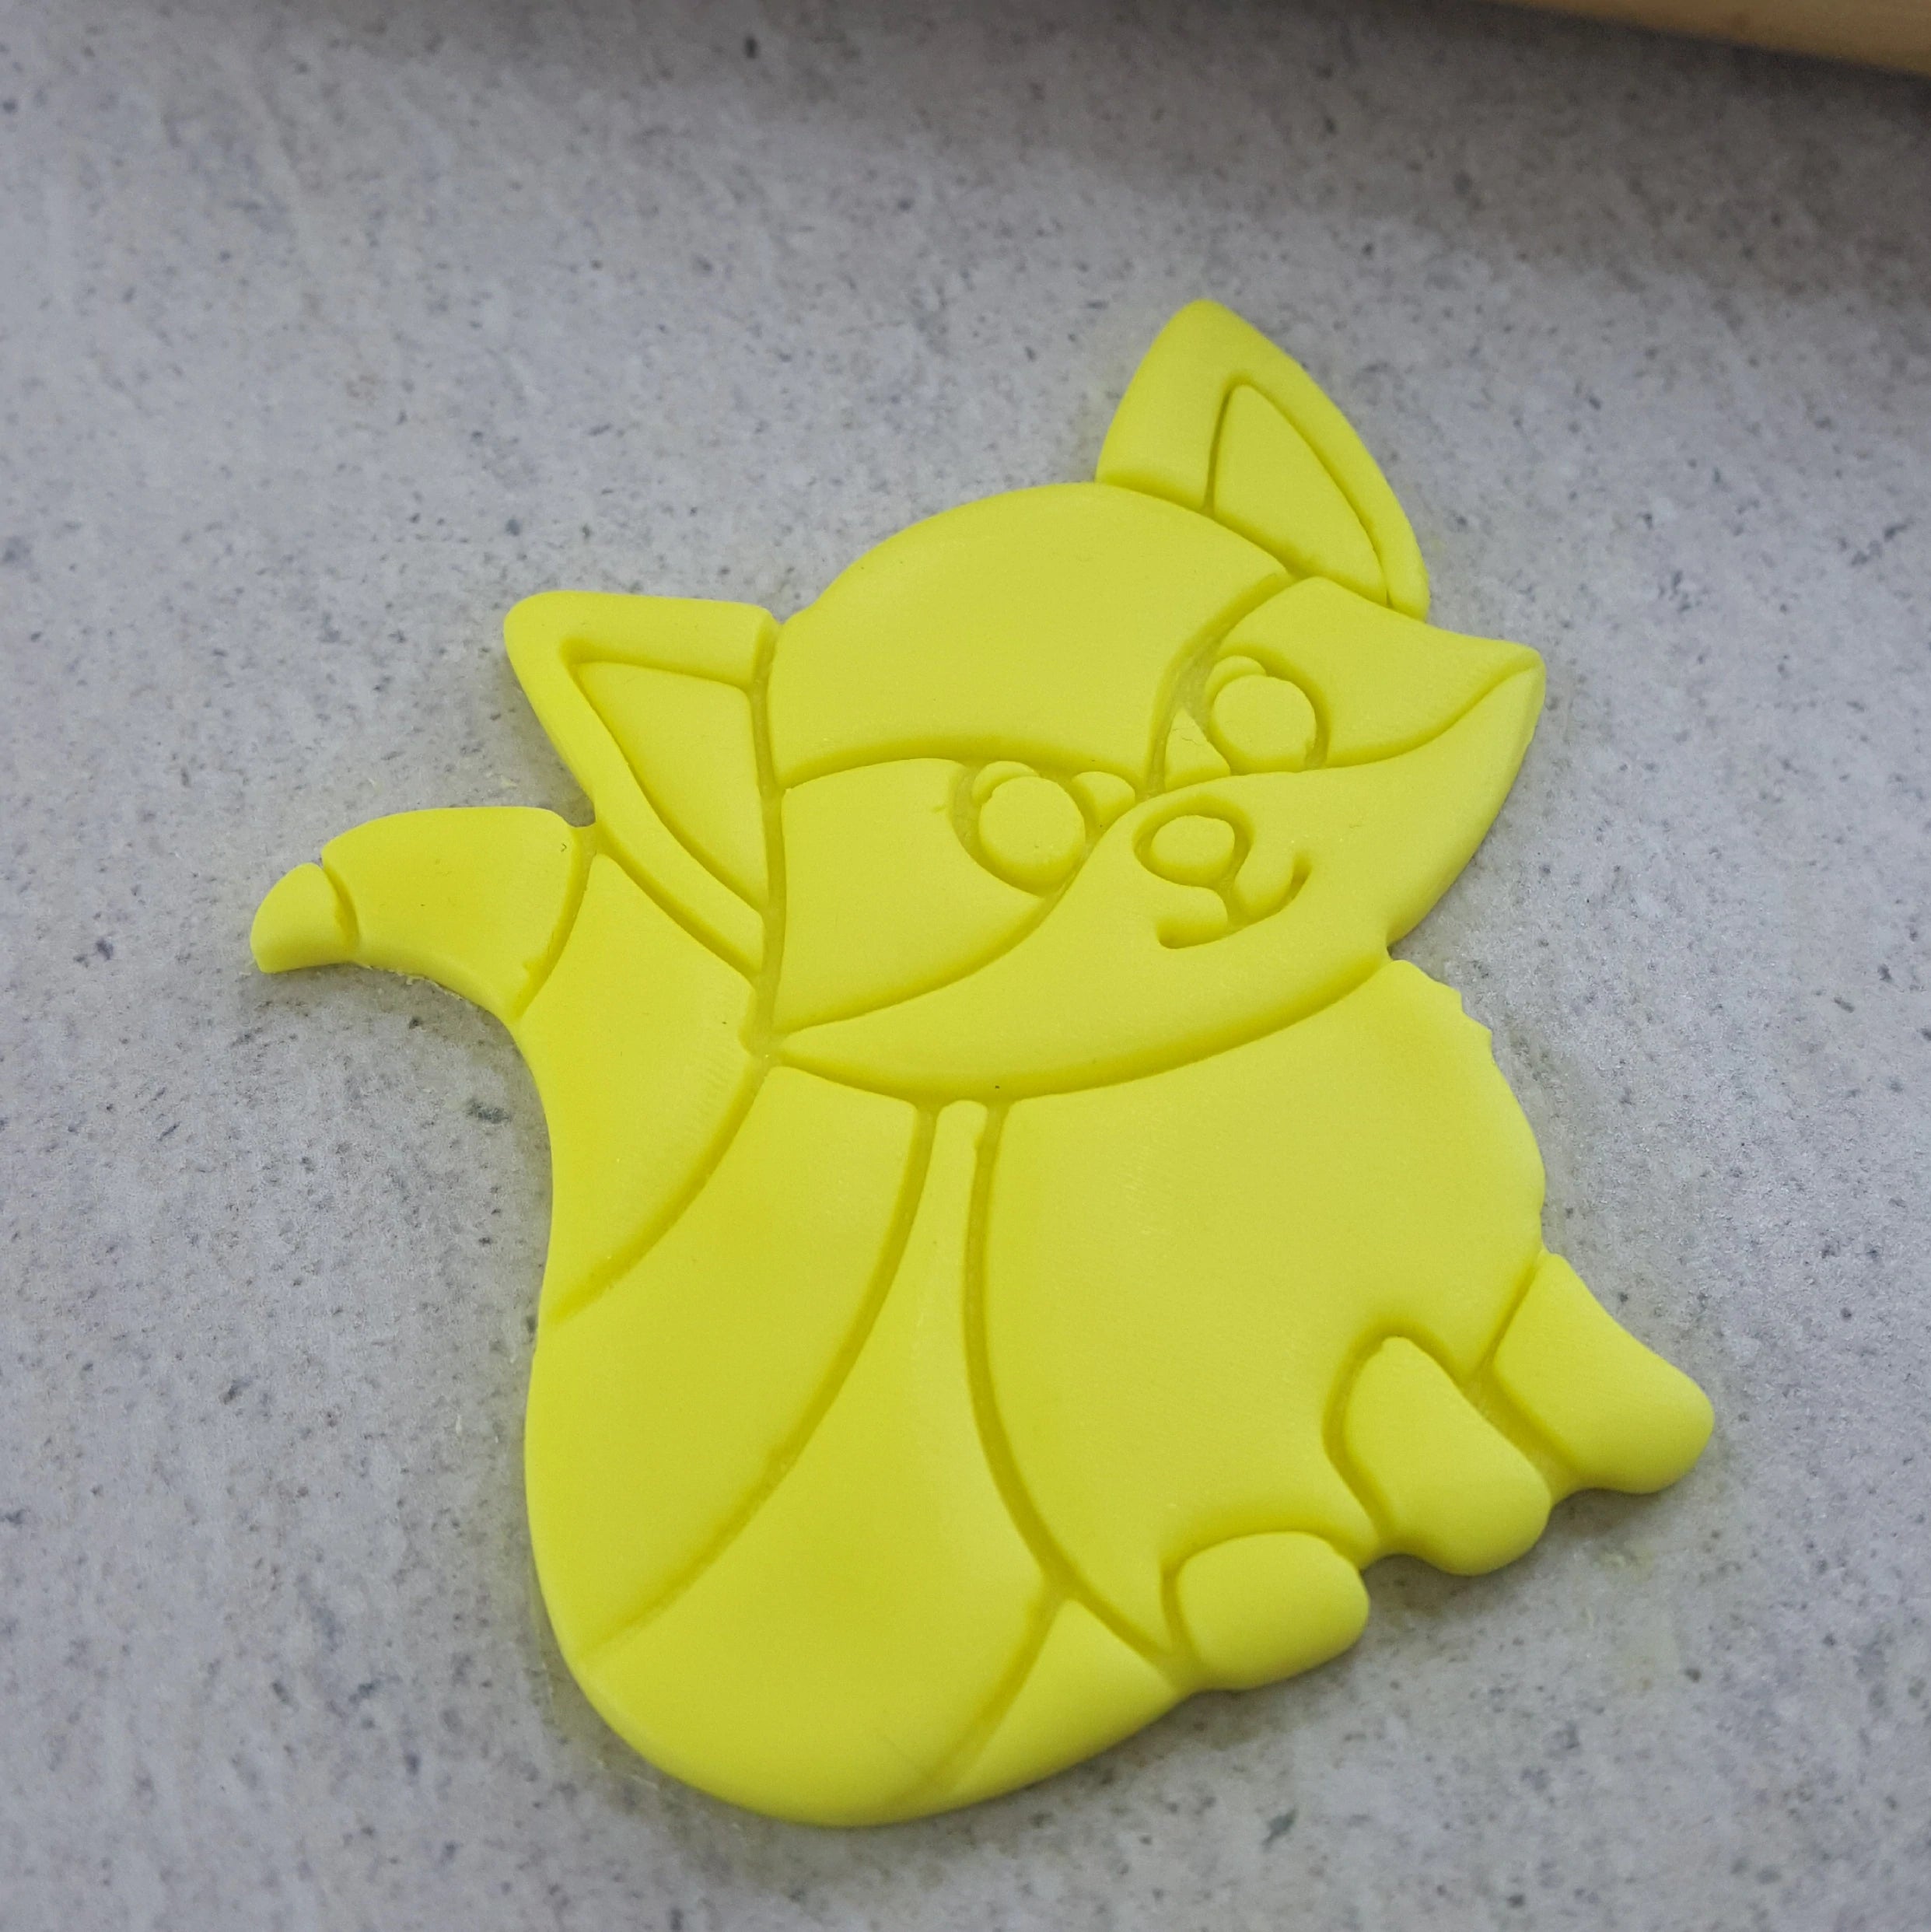 Custom Cookie Cutters Racoon Cutter and Embosser Set